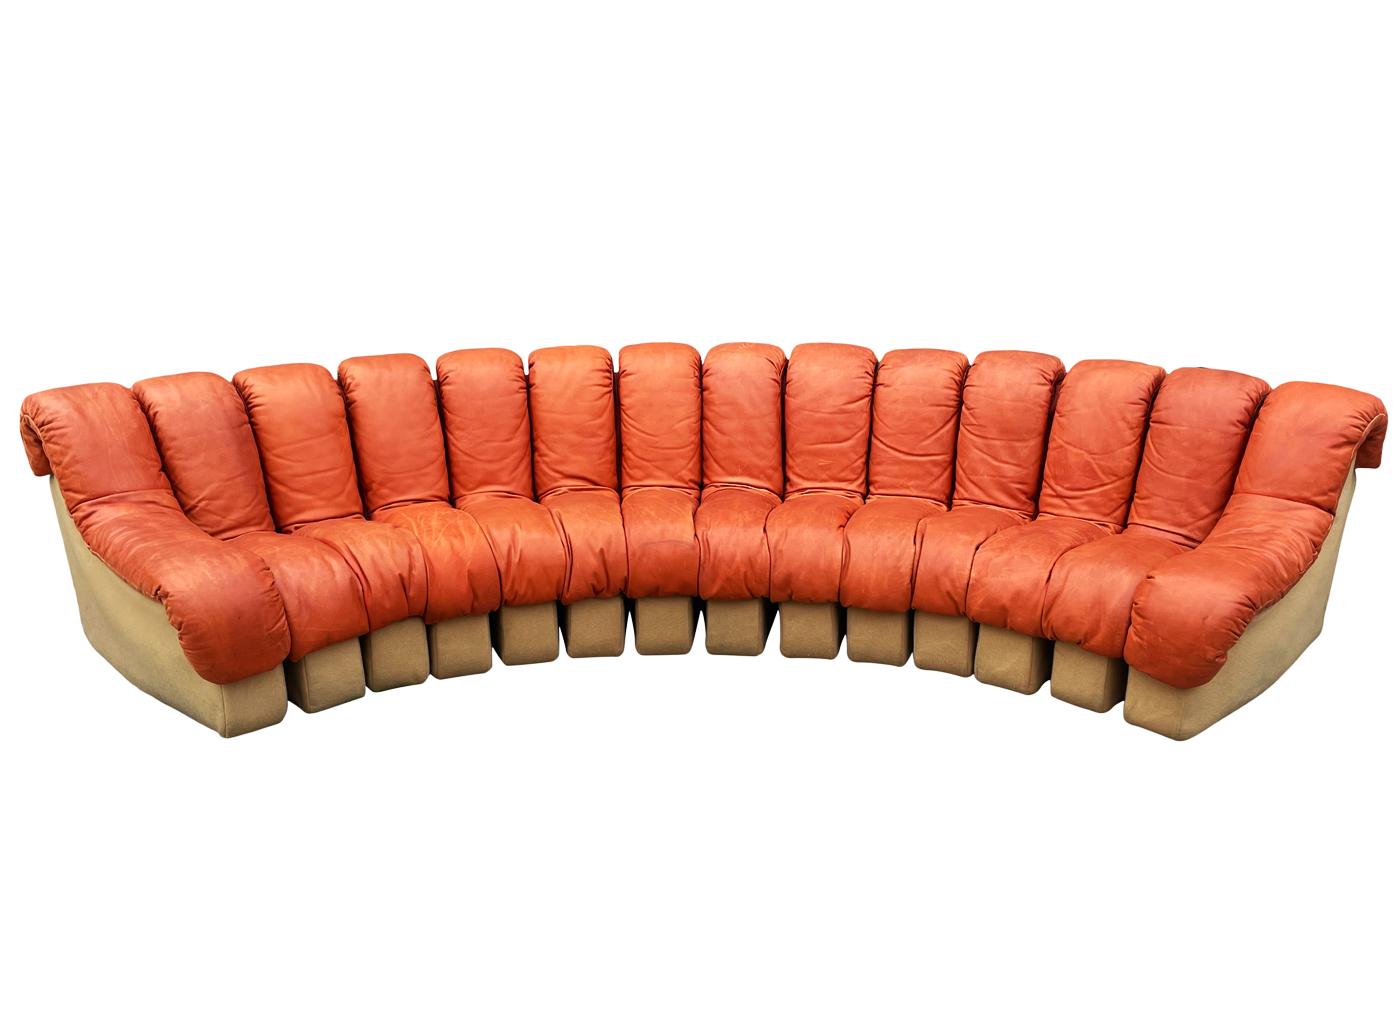 Mid-Century Modern De Sede 600 Nonstop Curved Leather Sectional Sofa in Cognac 2